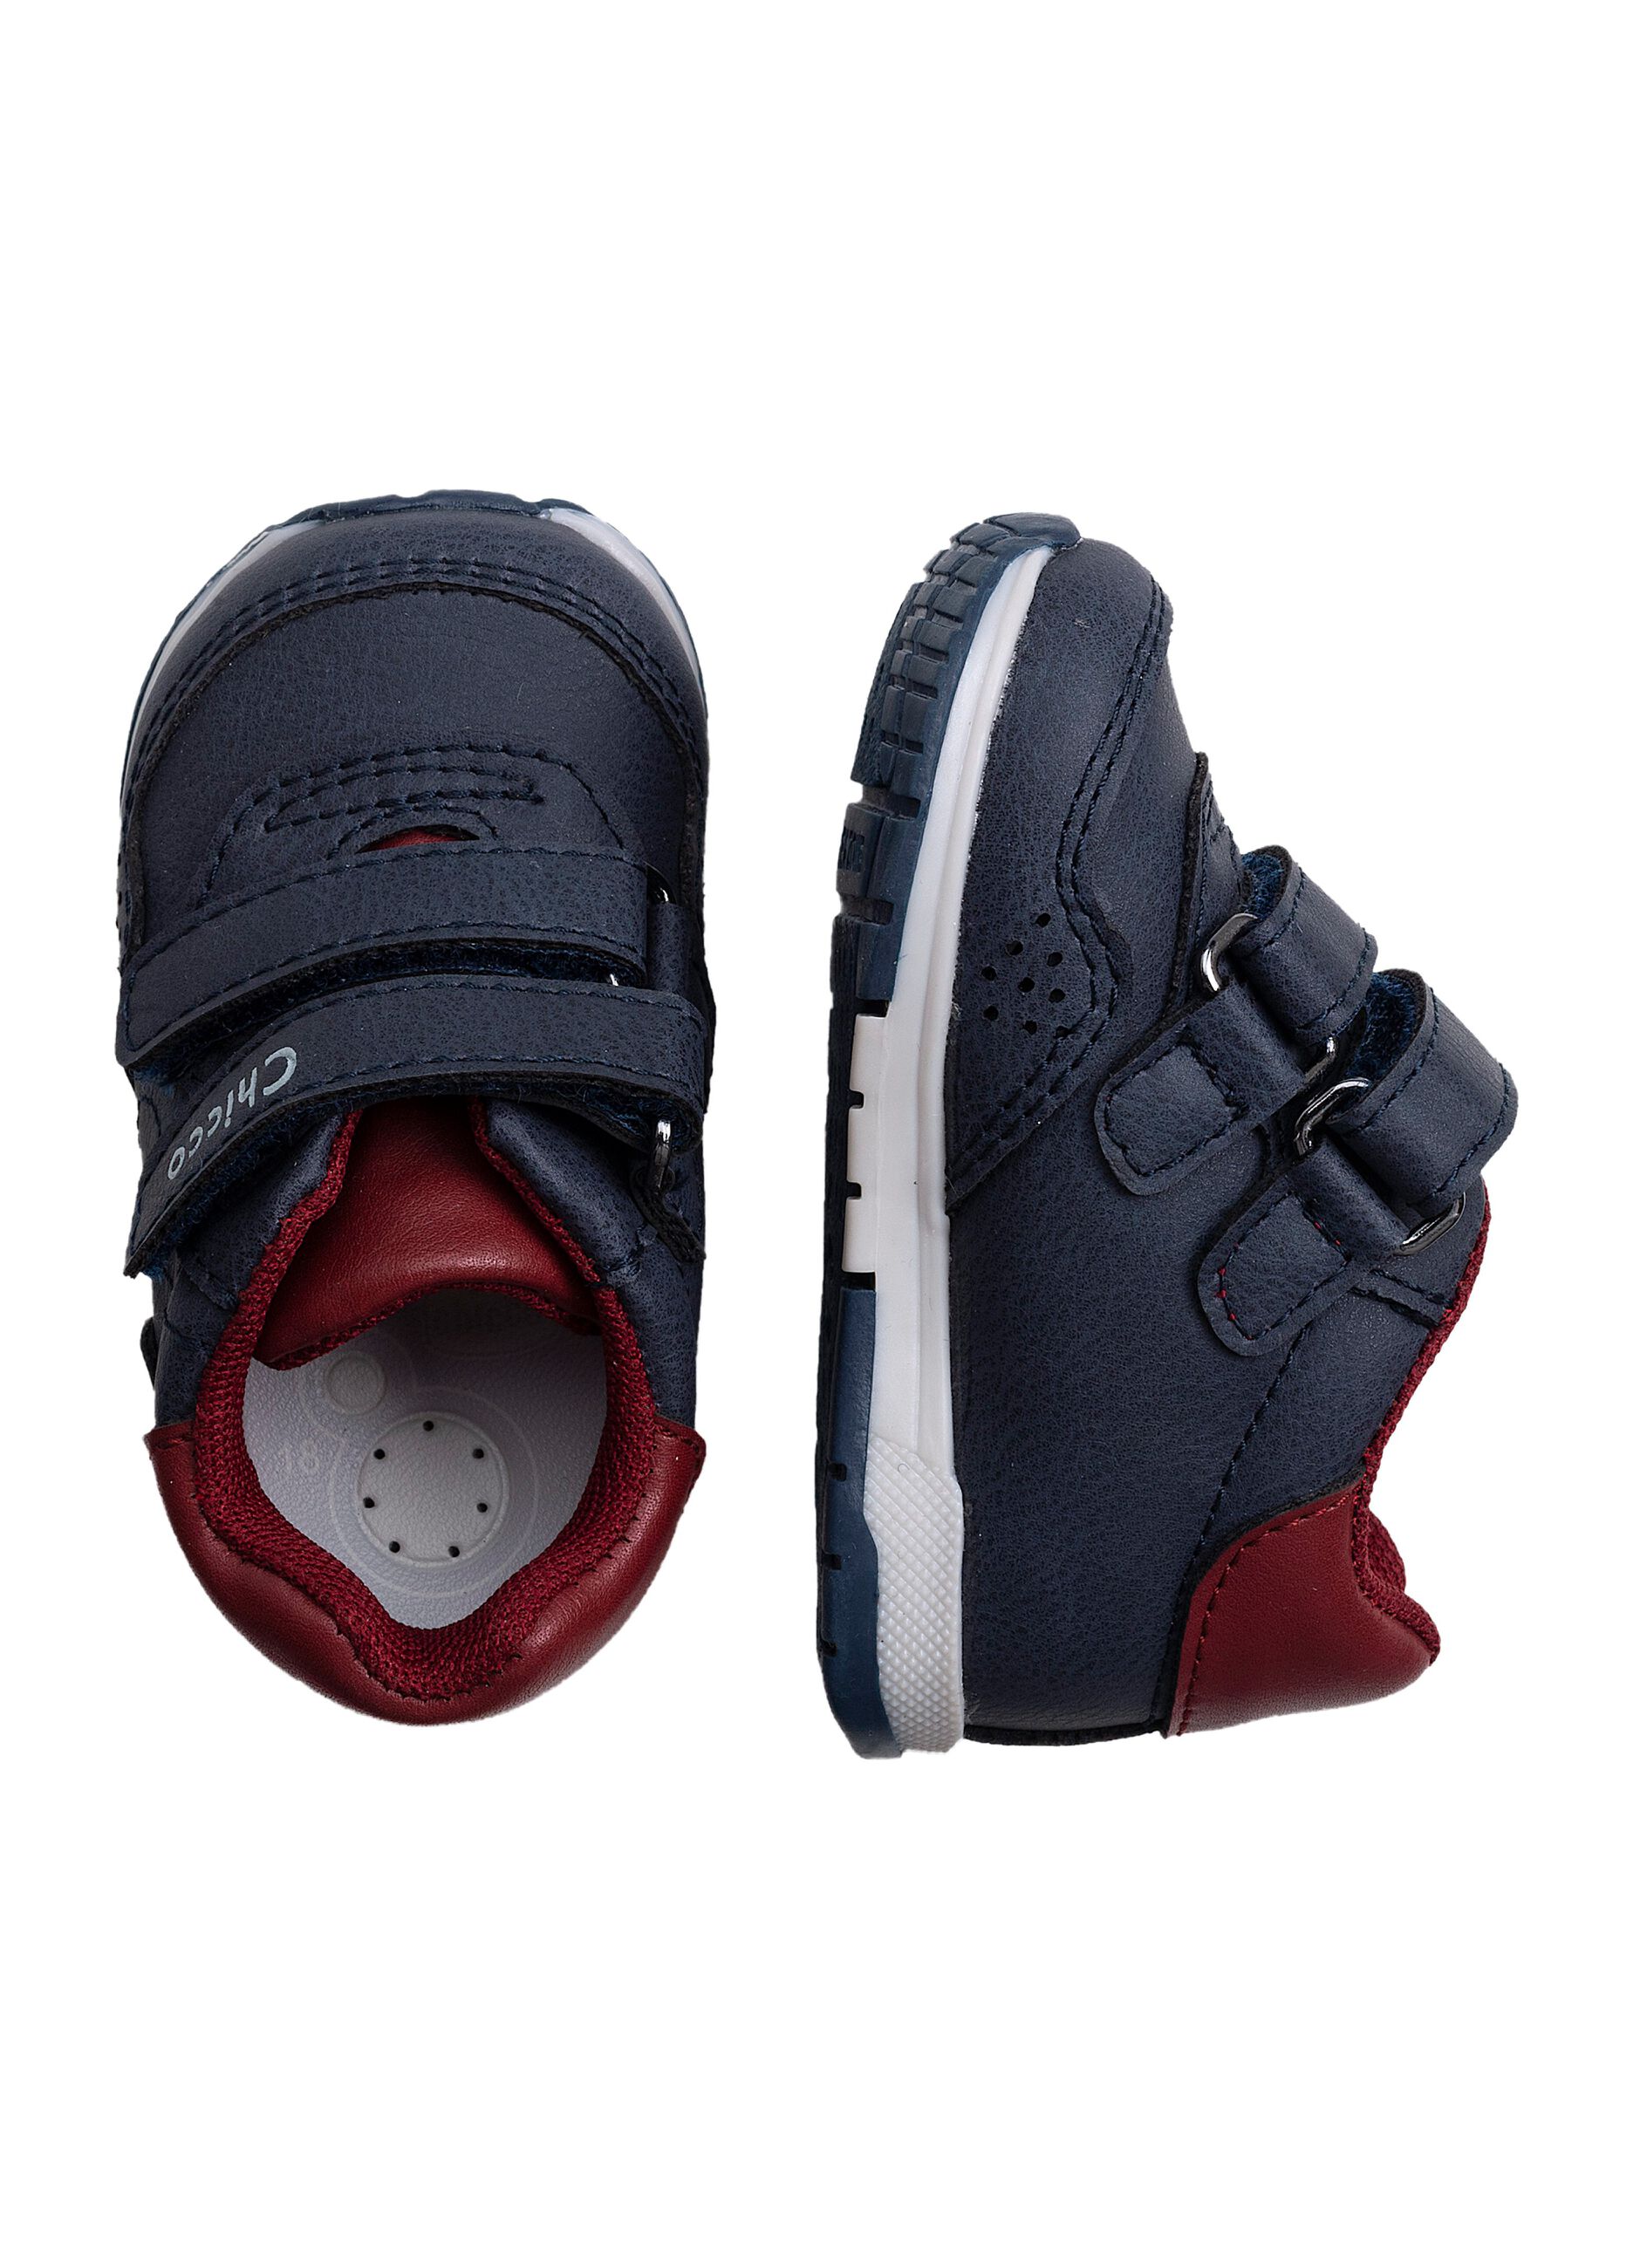 Chicco boys’ shoes